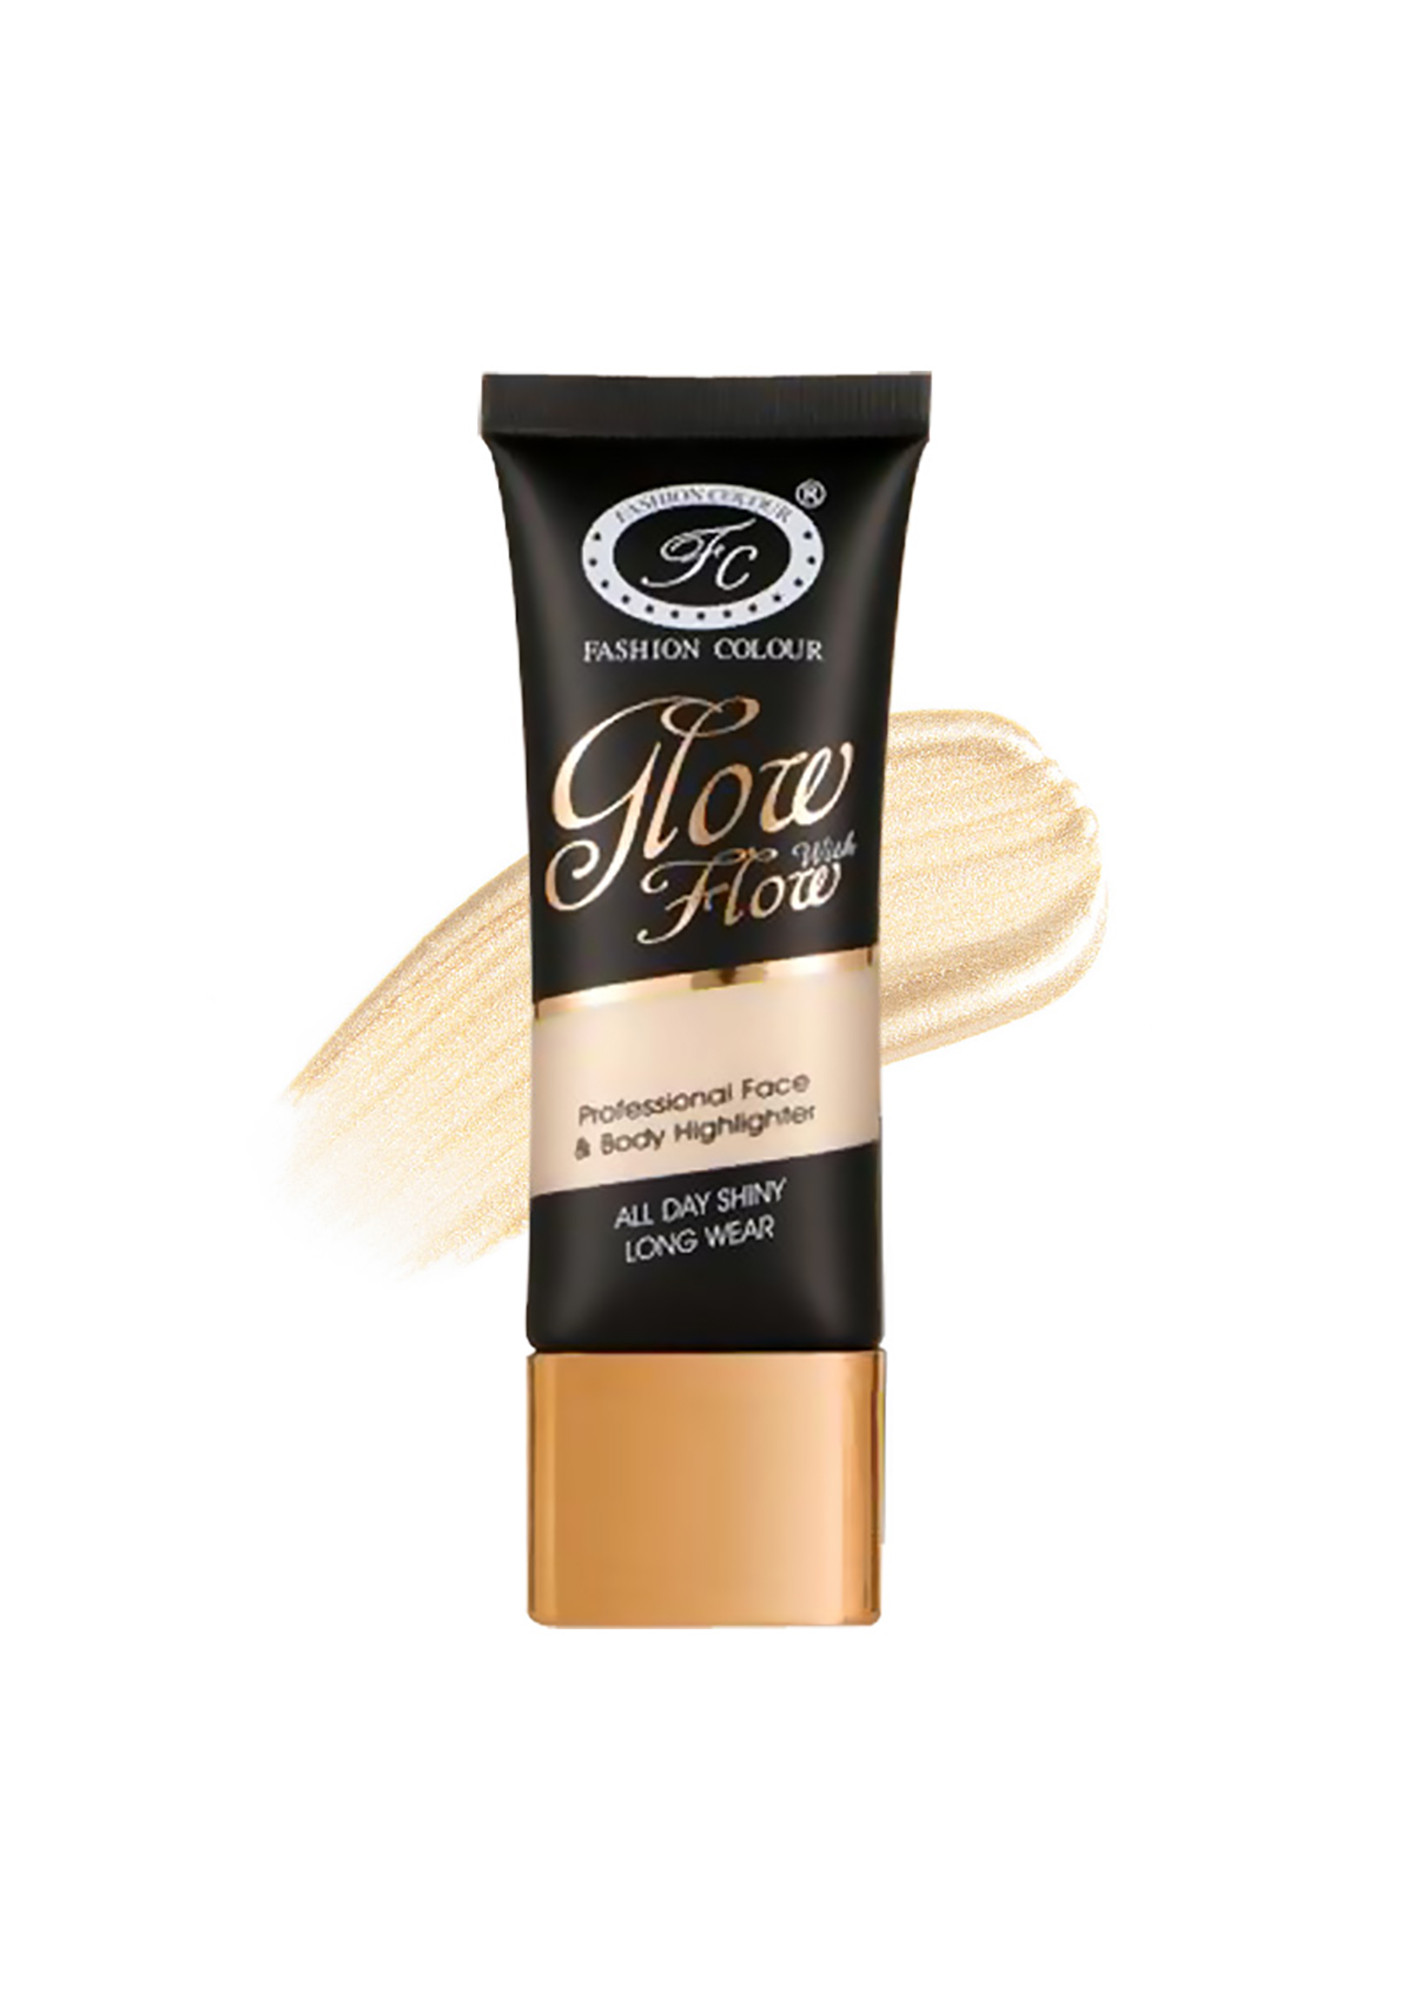 Professional Face & Body Highlighter, SHADE 05